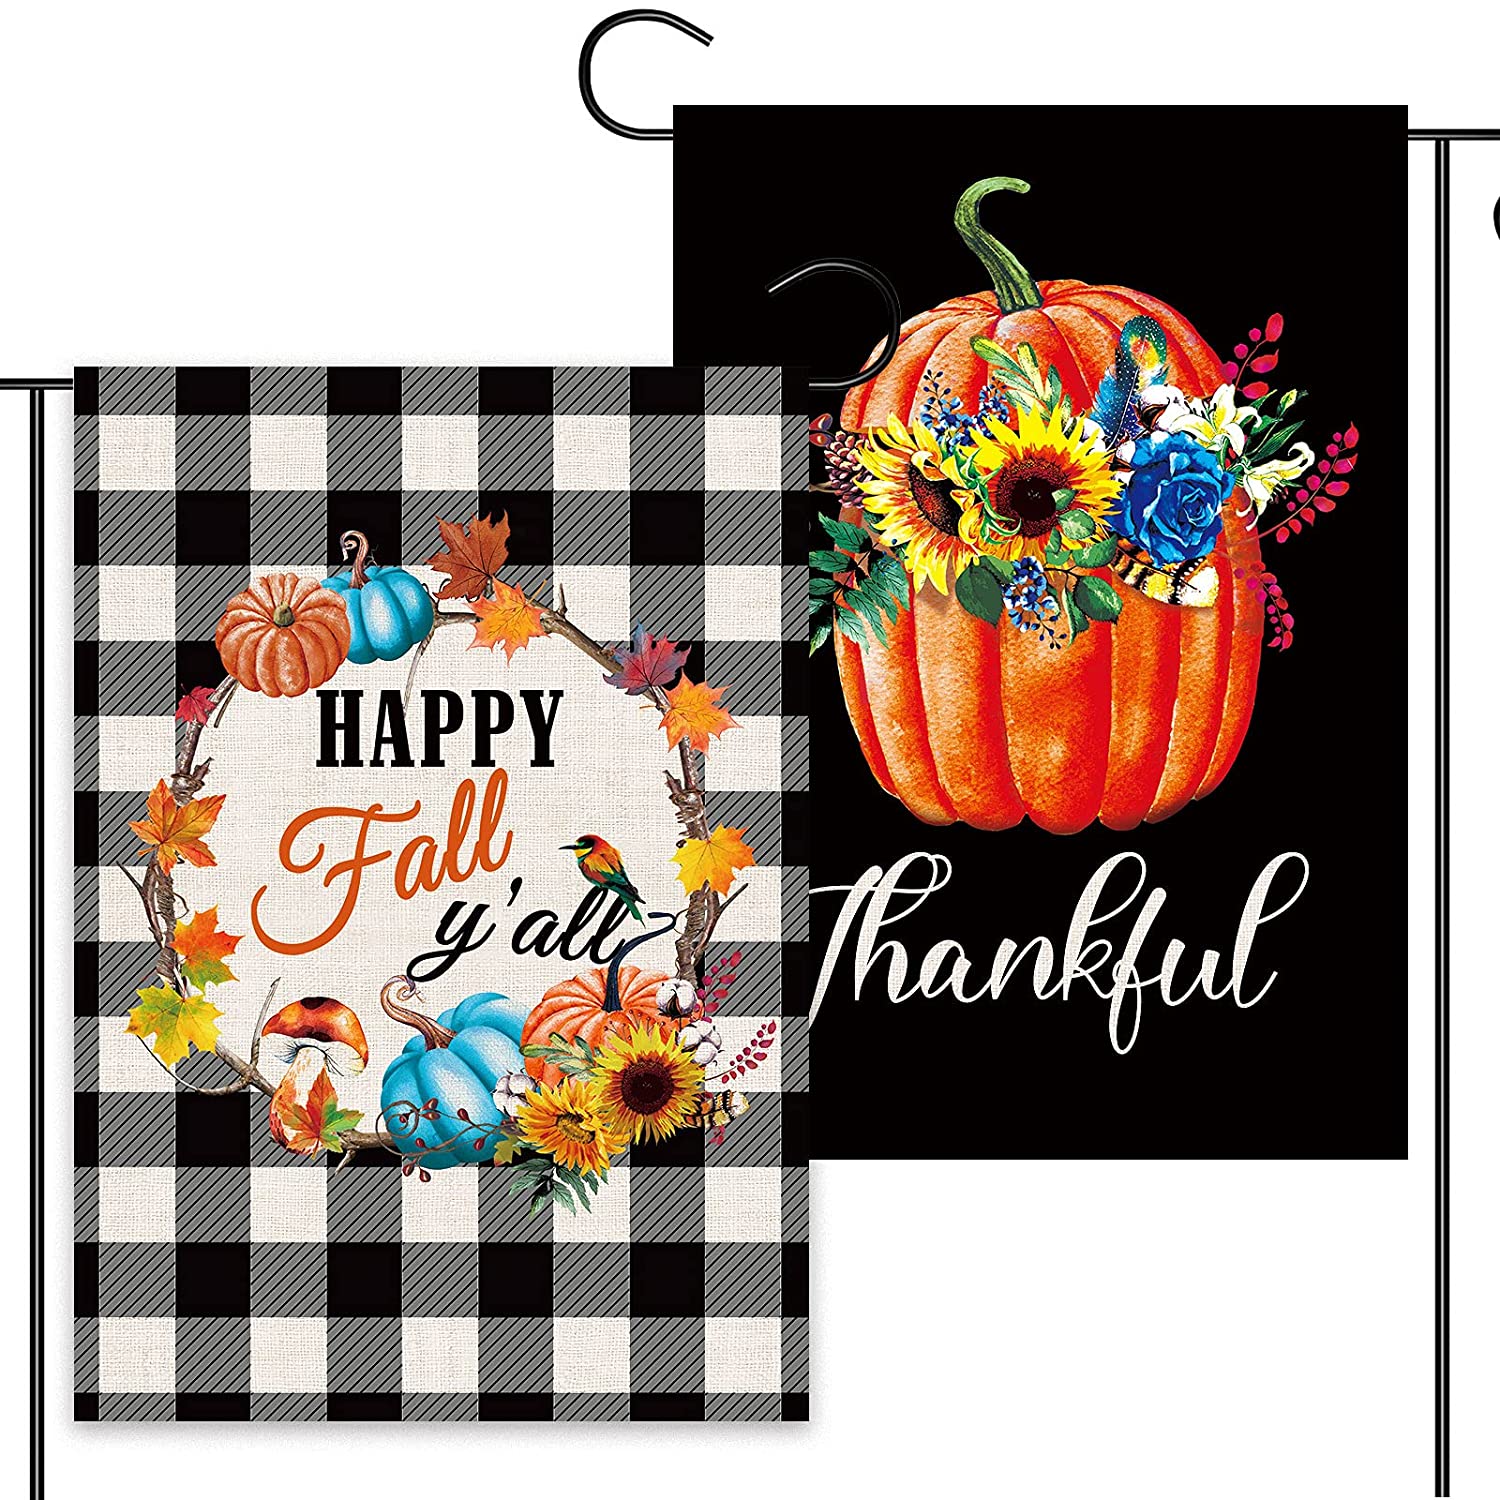 2 Pcs Welcome Fall Garden Flags  Double Sided 12 x 18 (Plaid, Wreath)